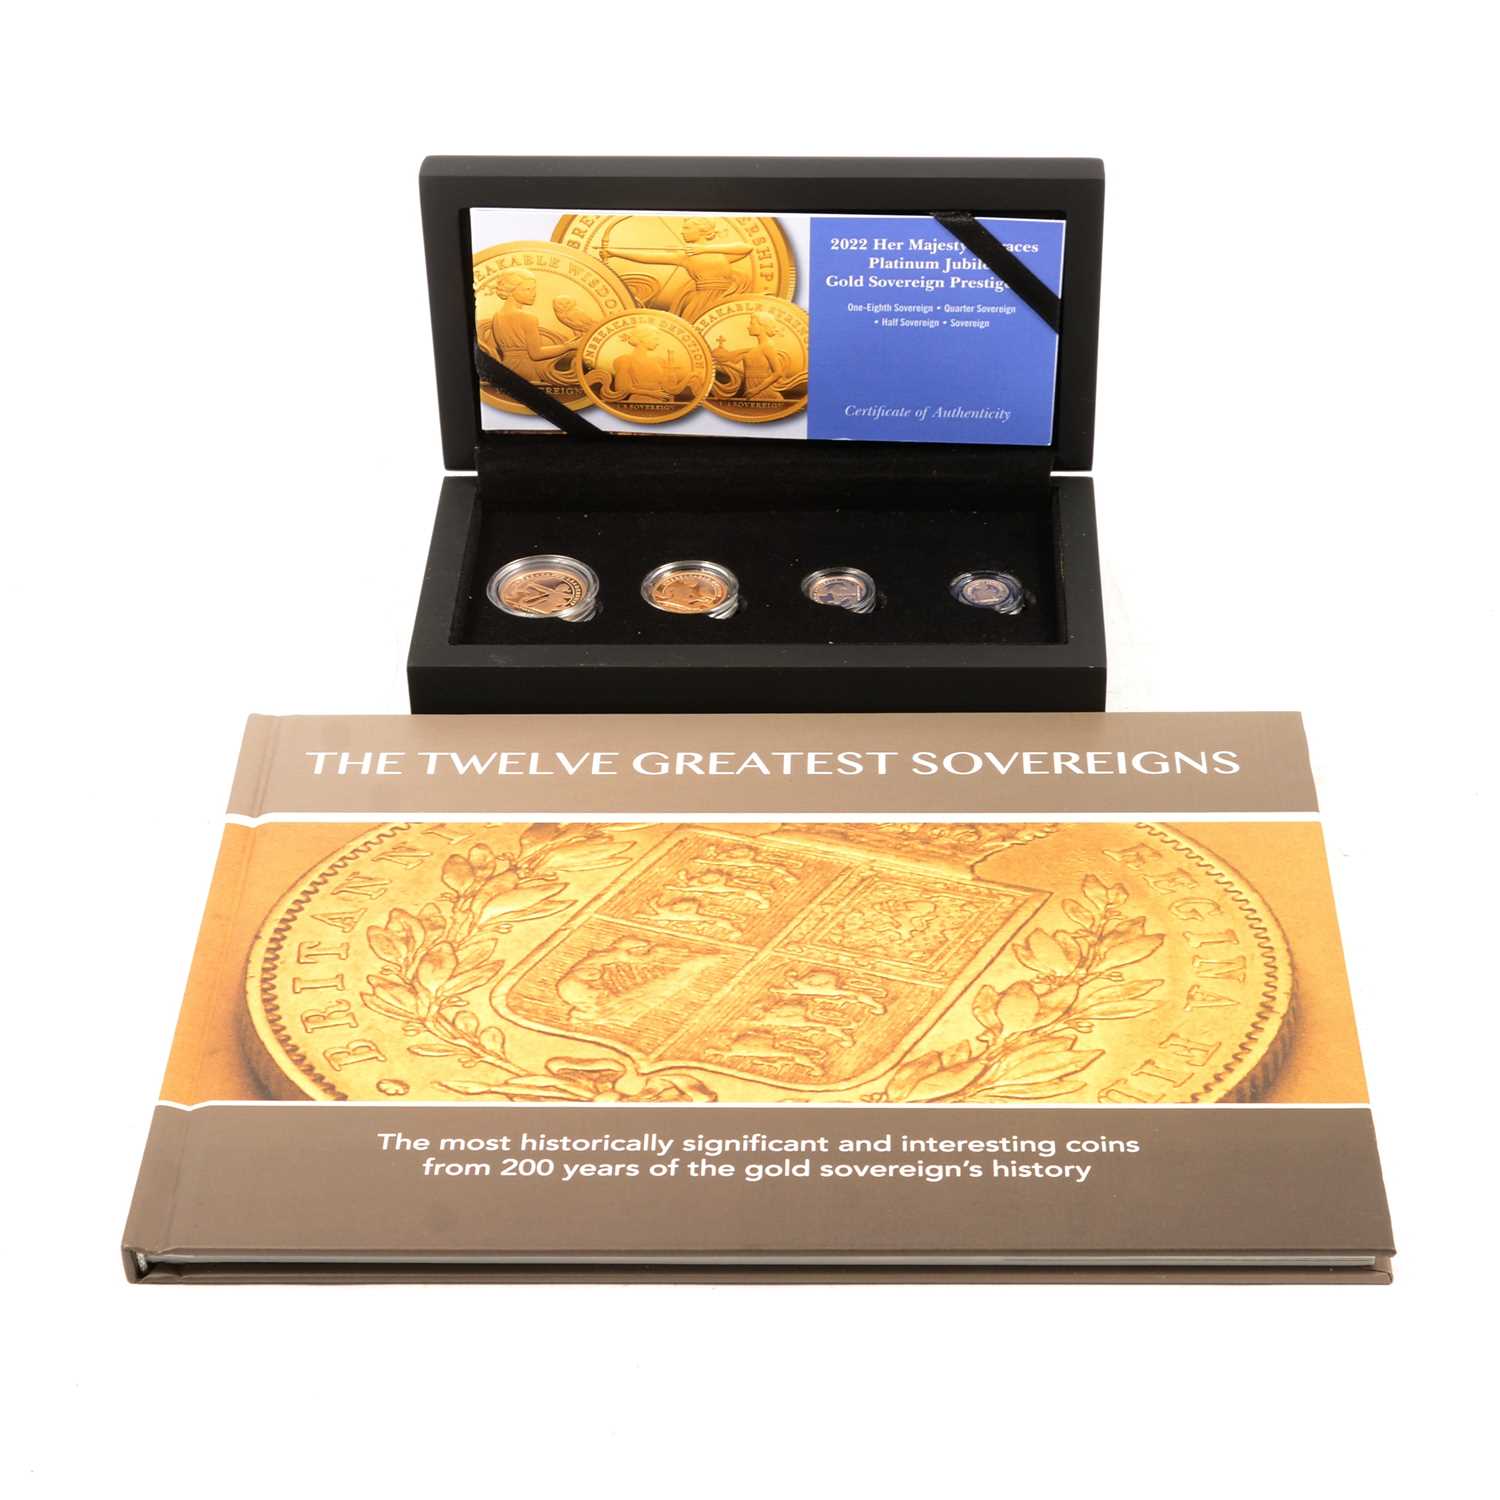 Lot 252 - Her Majesty's Graces Platinum Jubilee Gold Sovereign Prestige Set, and collectors' book.